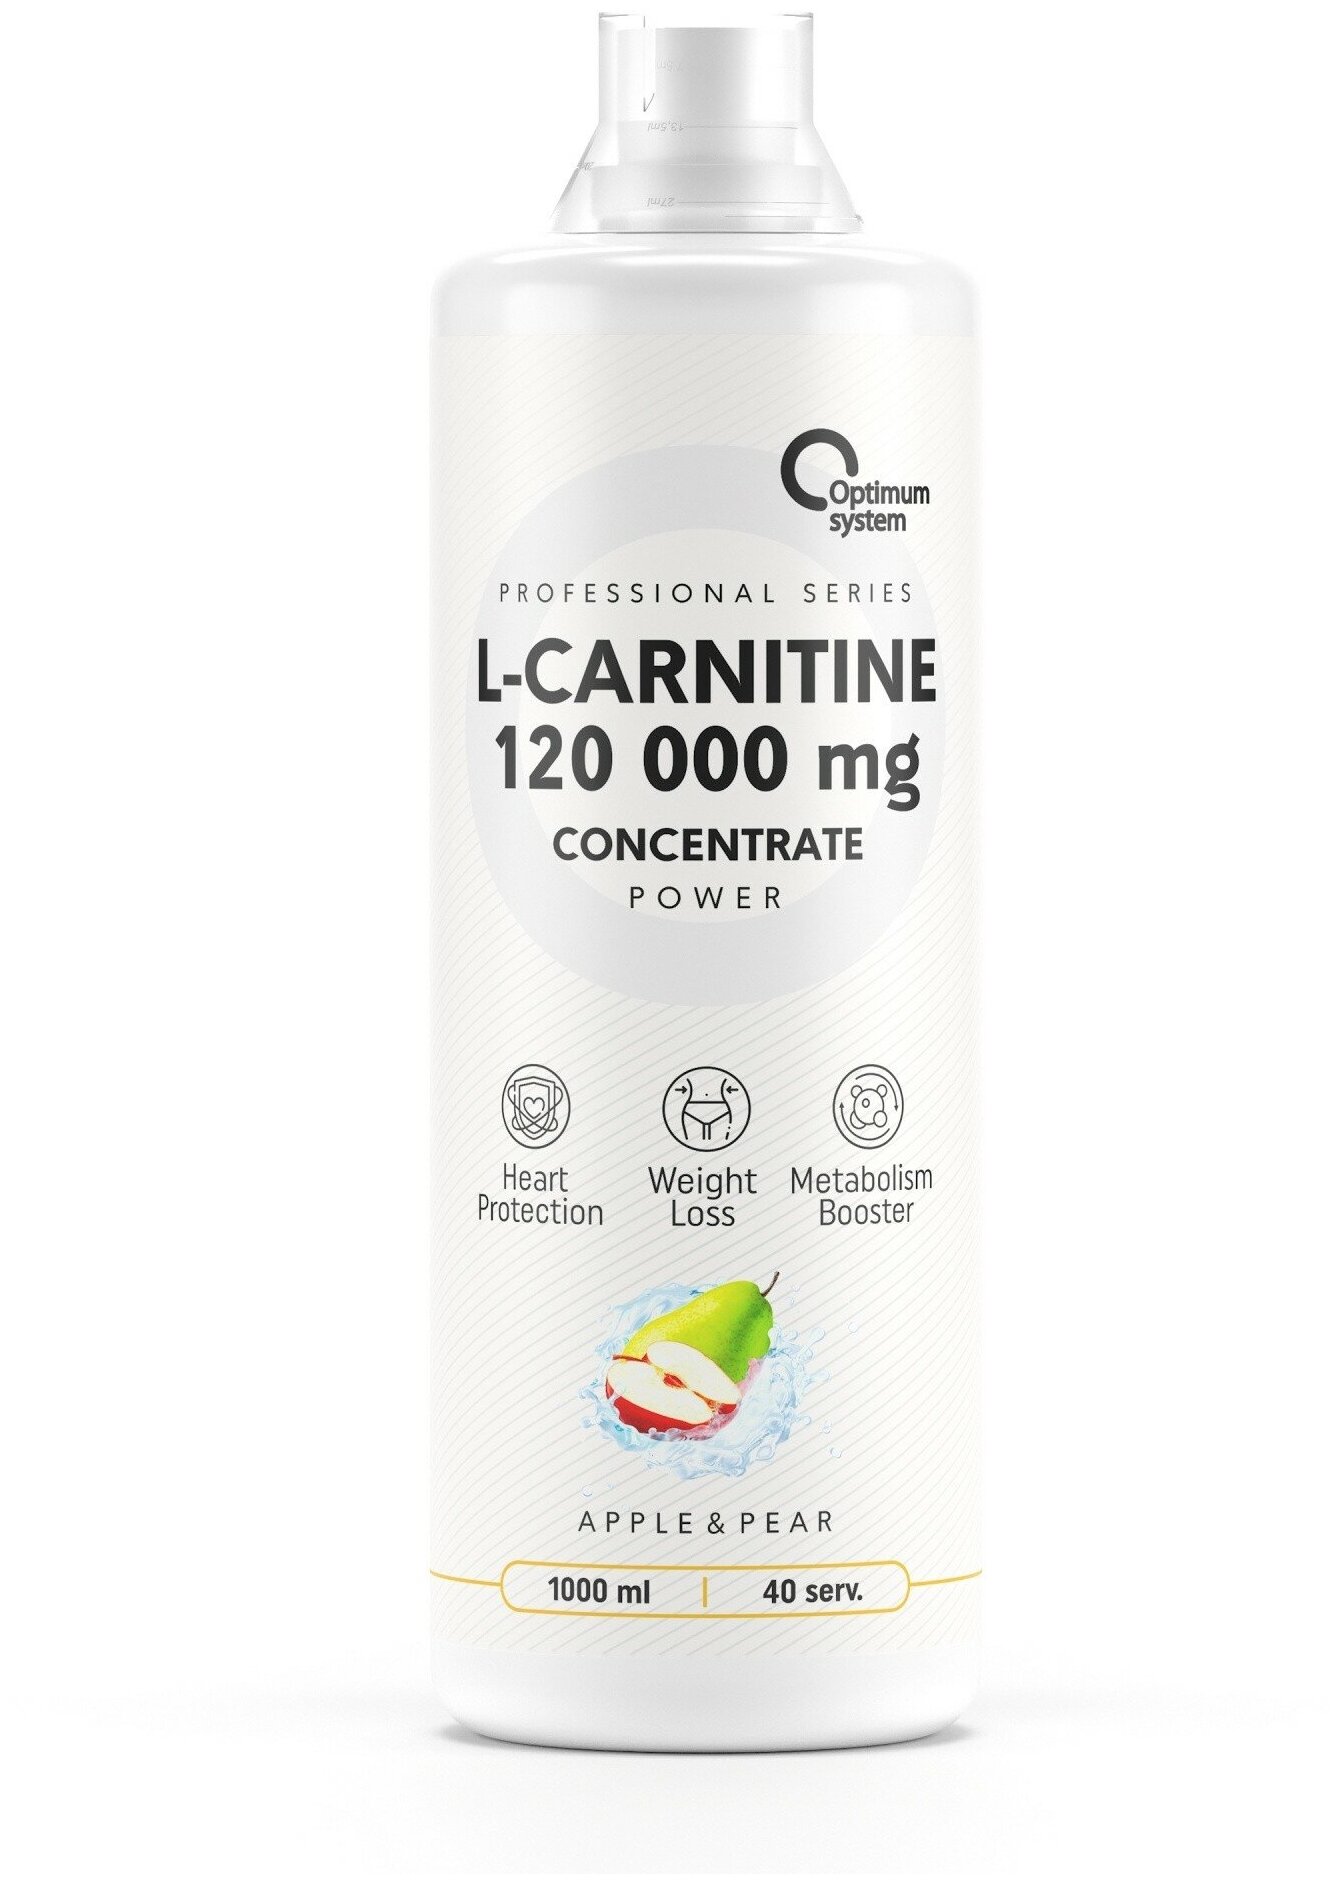 Optimum System L-Carnitine Concentrate 120000 mg POWER, 1000 мл (Ананас)